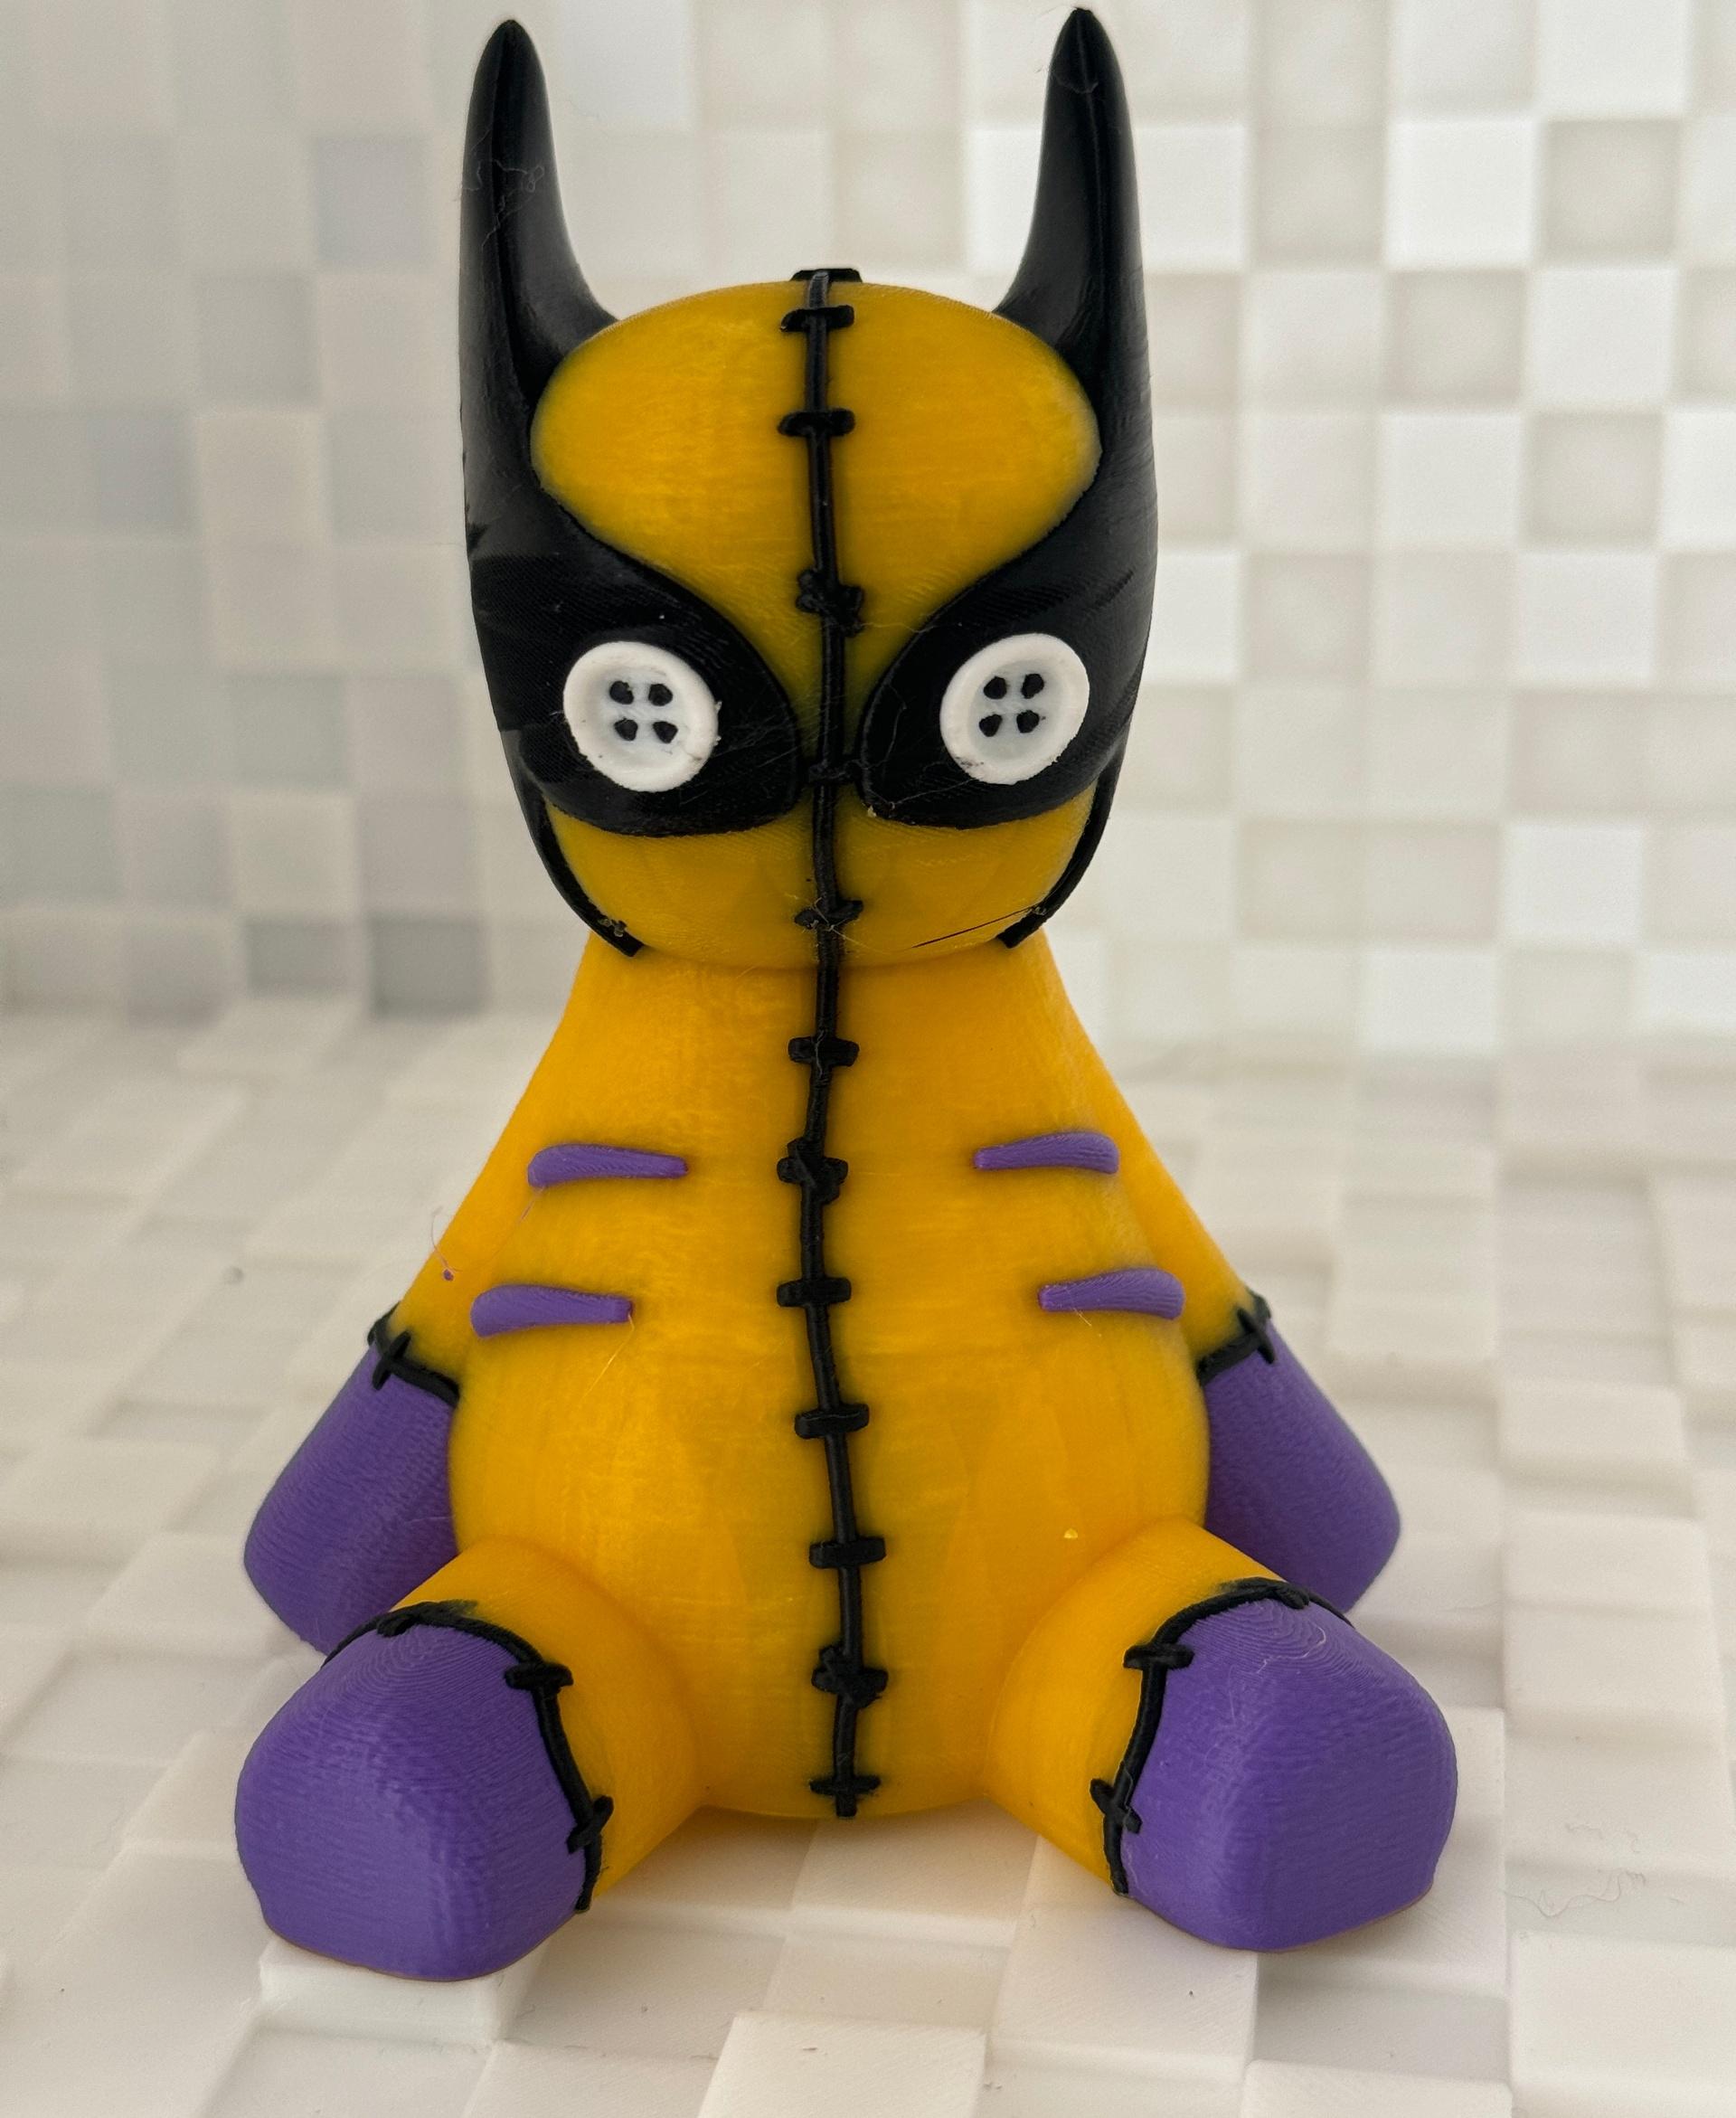 Wolverine Voodoo - Printed on the Bambu Lab A1 Mini in Polymaker Polylite Yellow PLA, Duramic Purple PLA, and Elegoo Black and White PLA, this little guy took 3 days, 1 hour and 49 minutes to finish, but he was worth it.

So fun and cute!  - 3d model